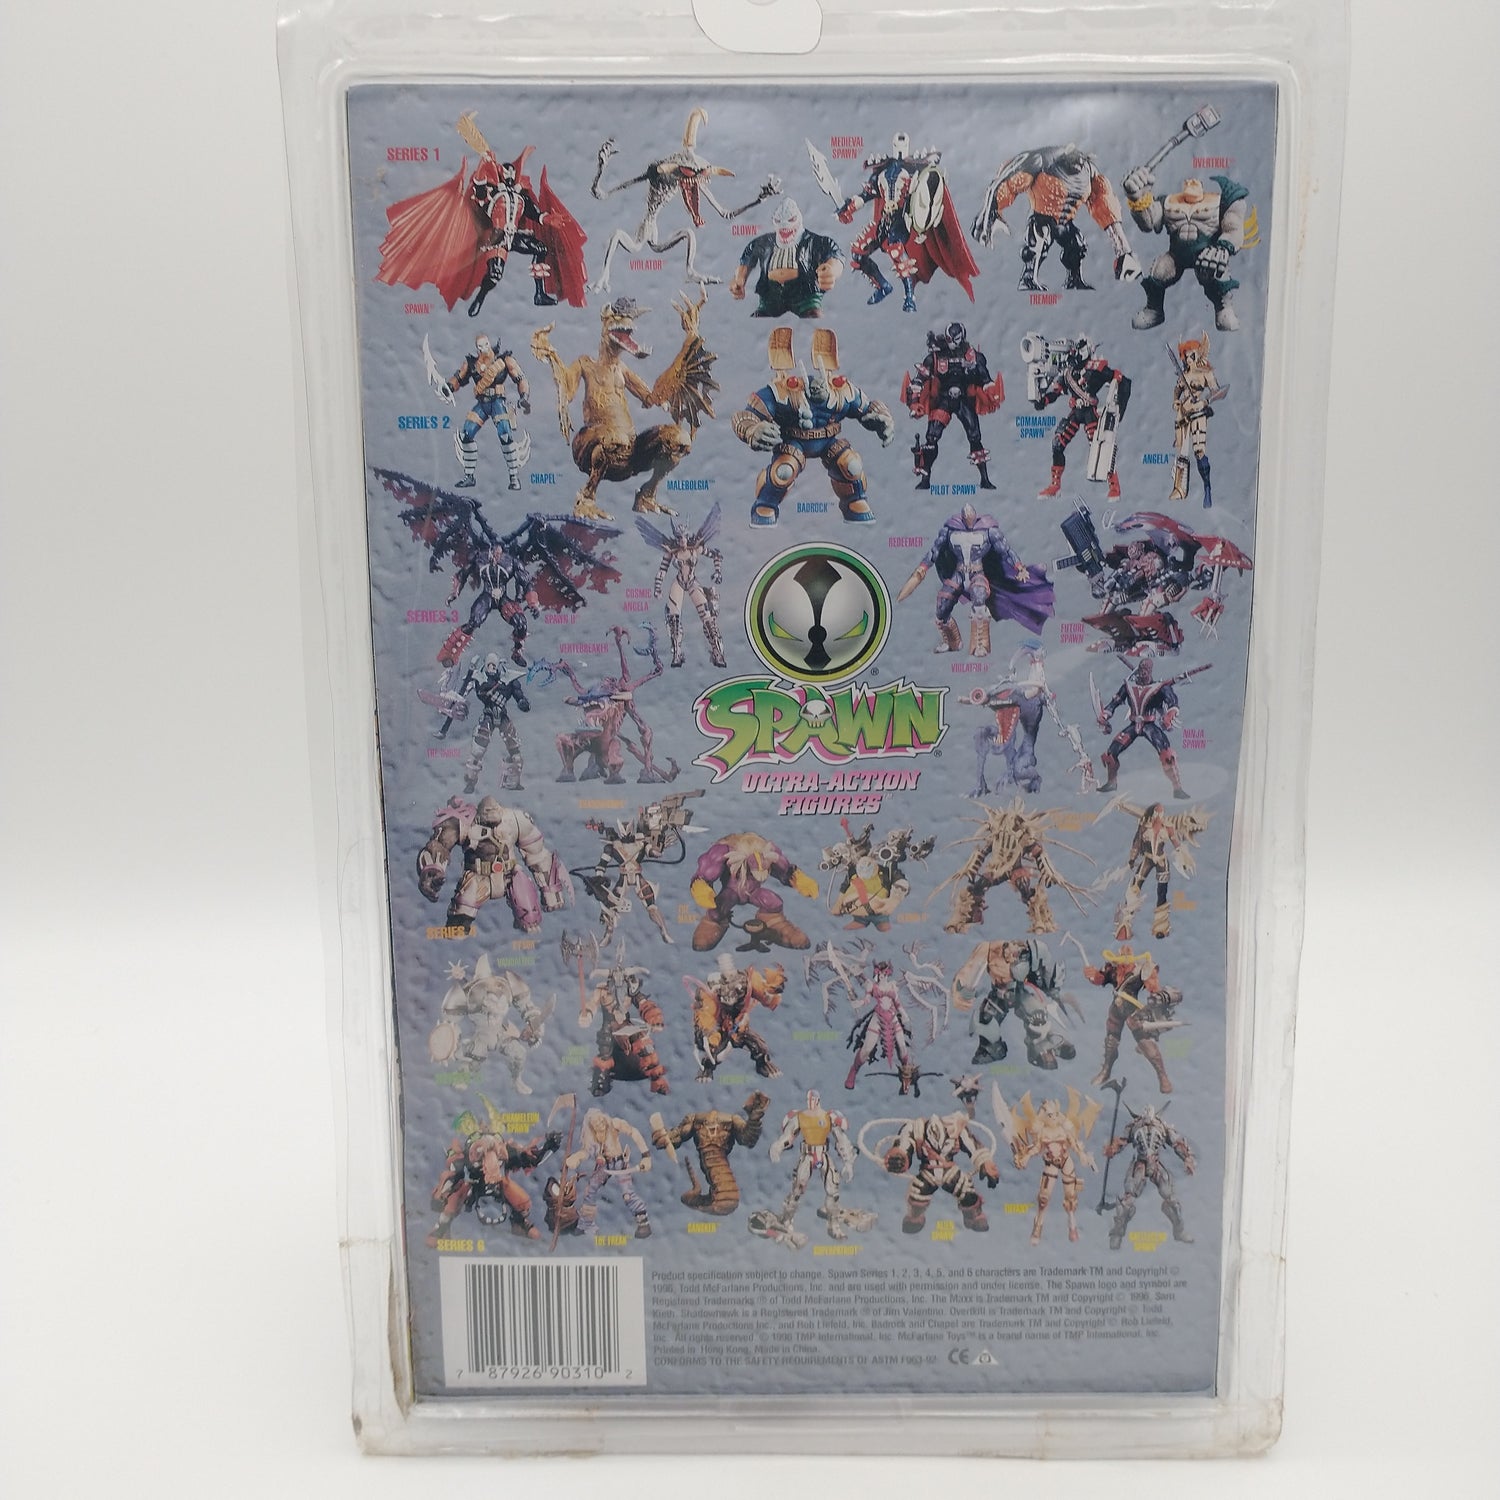 A picture of the back of the card featuring pictures of other action figures available along with various playsets available for purchase. 